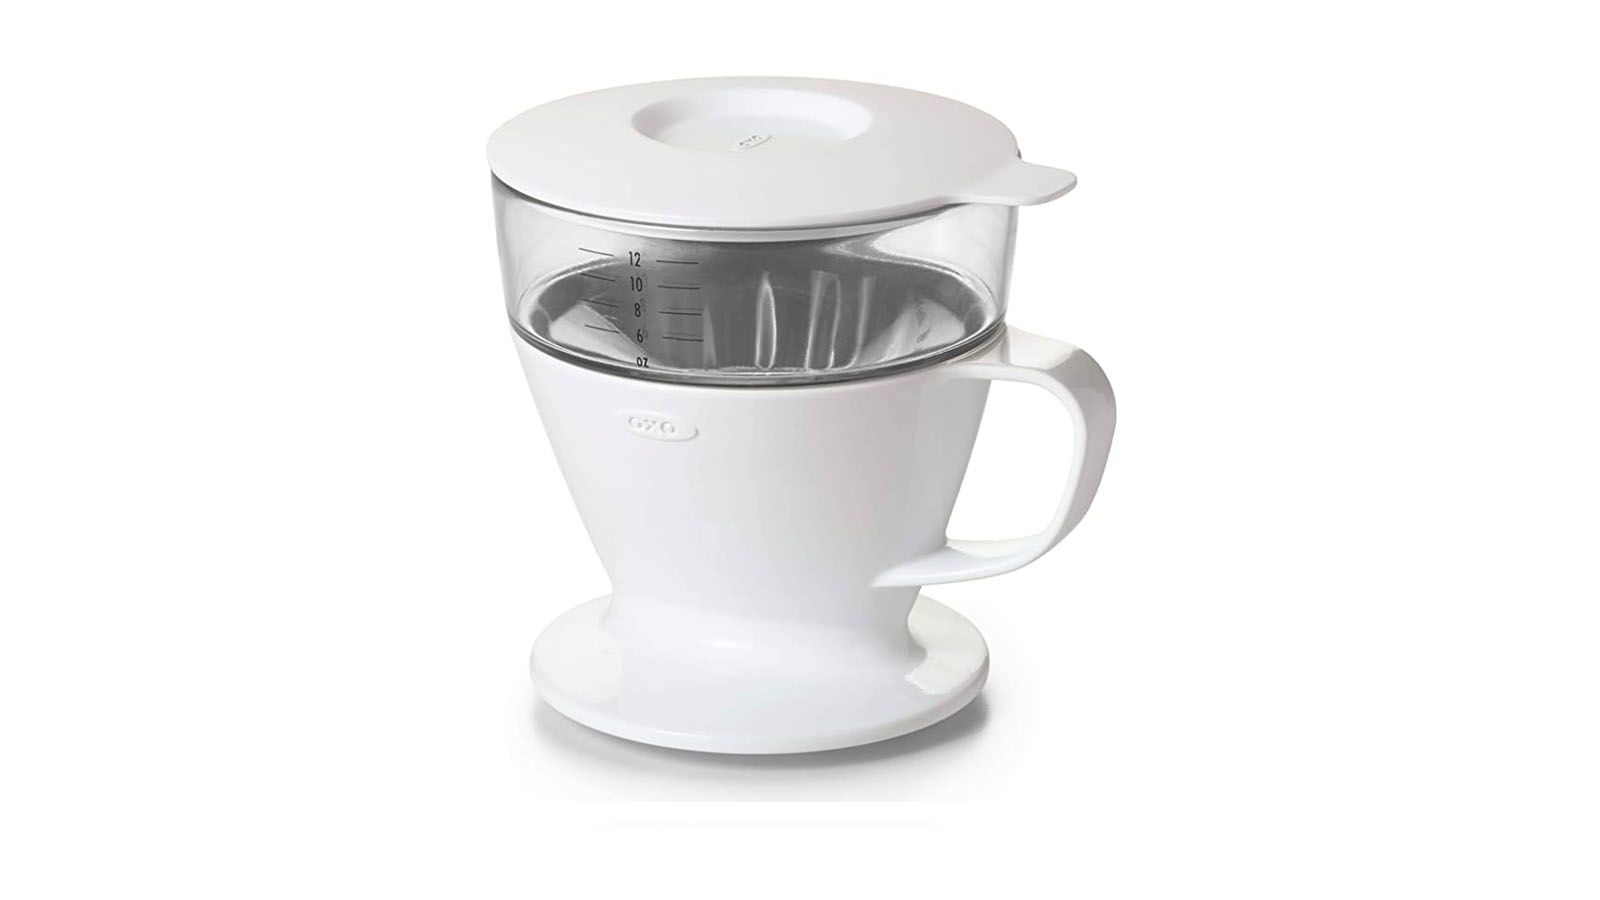 DOWAN Pour Over Coffee Dripper, Non Electric Pour Over Coffee